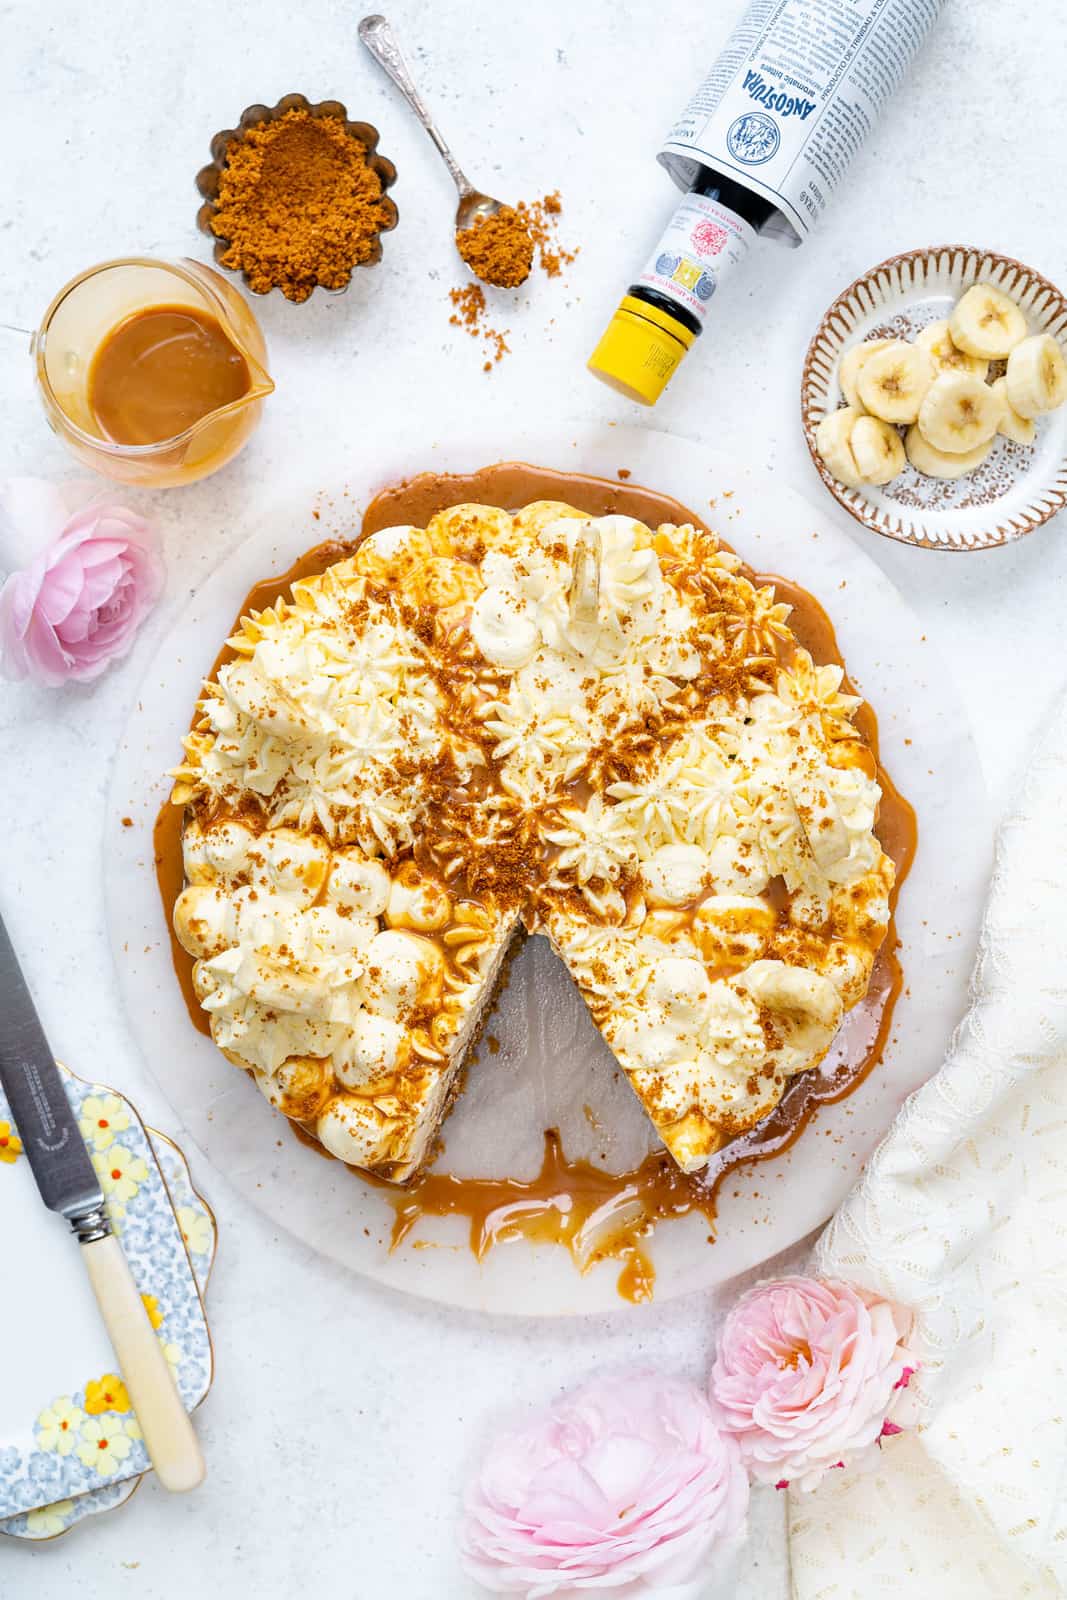 Banana Cake topped with whipped cream and caramel